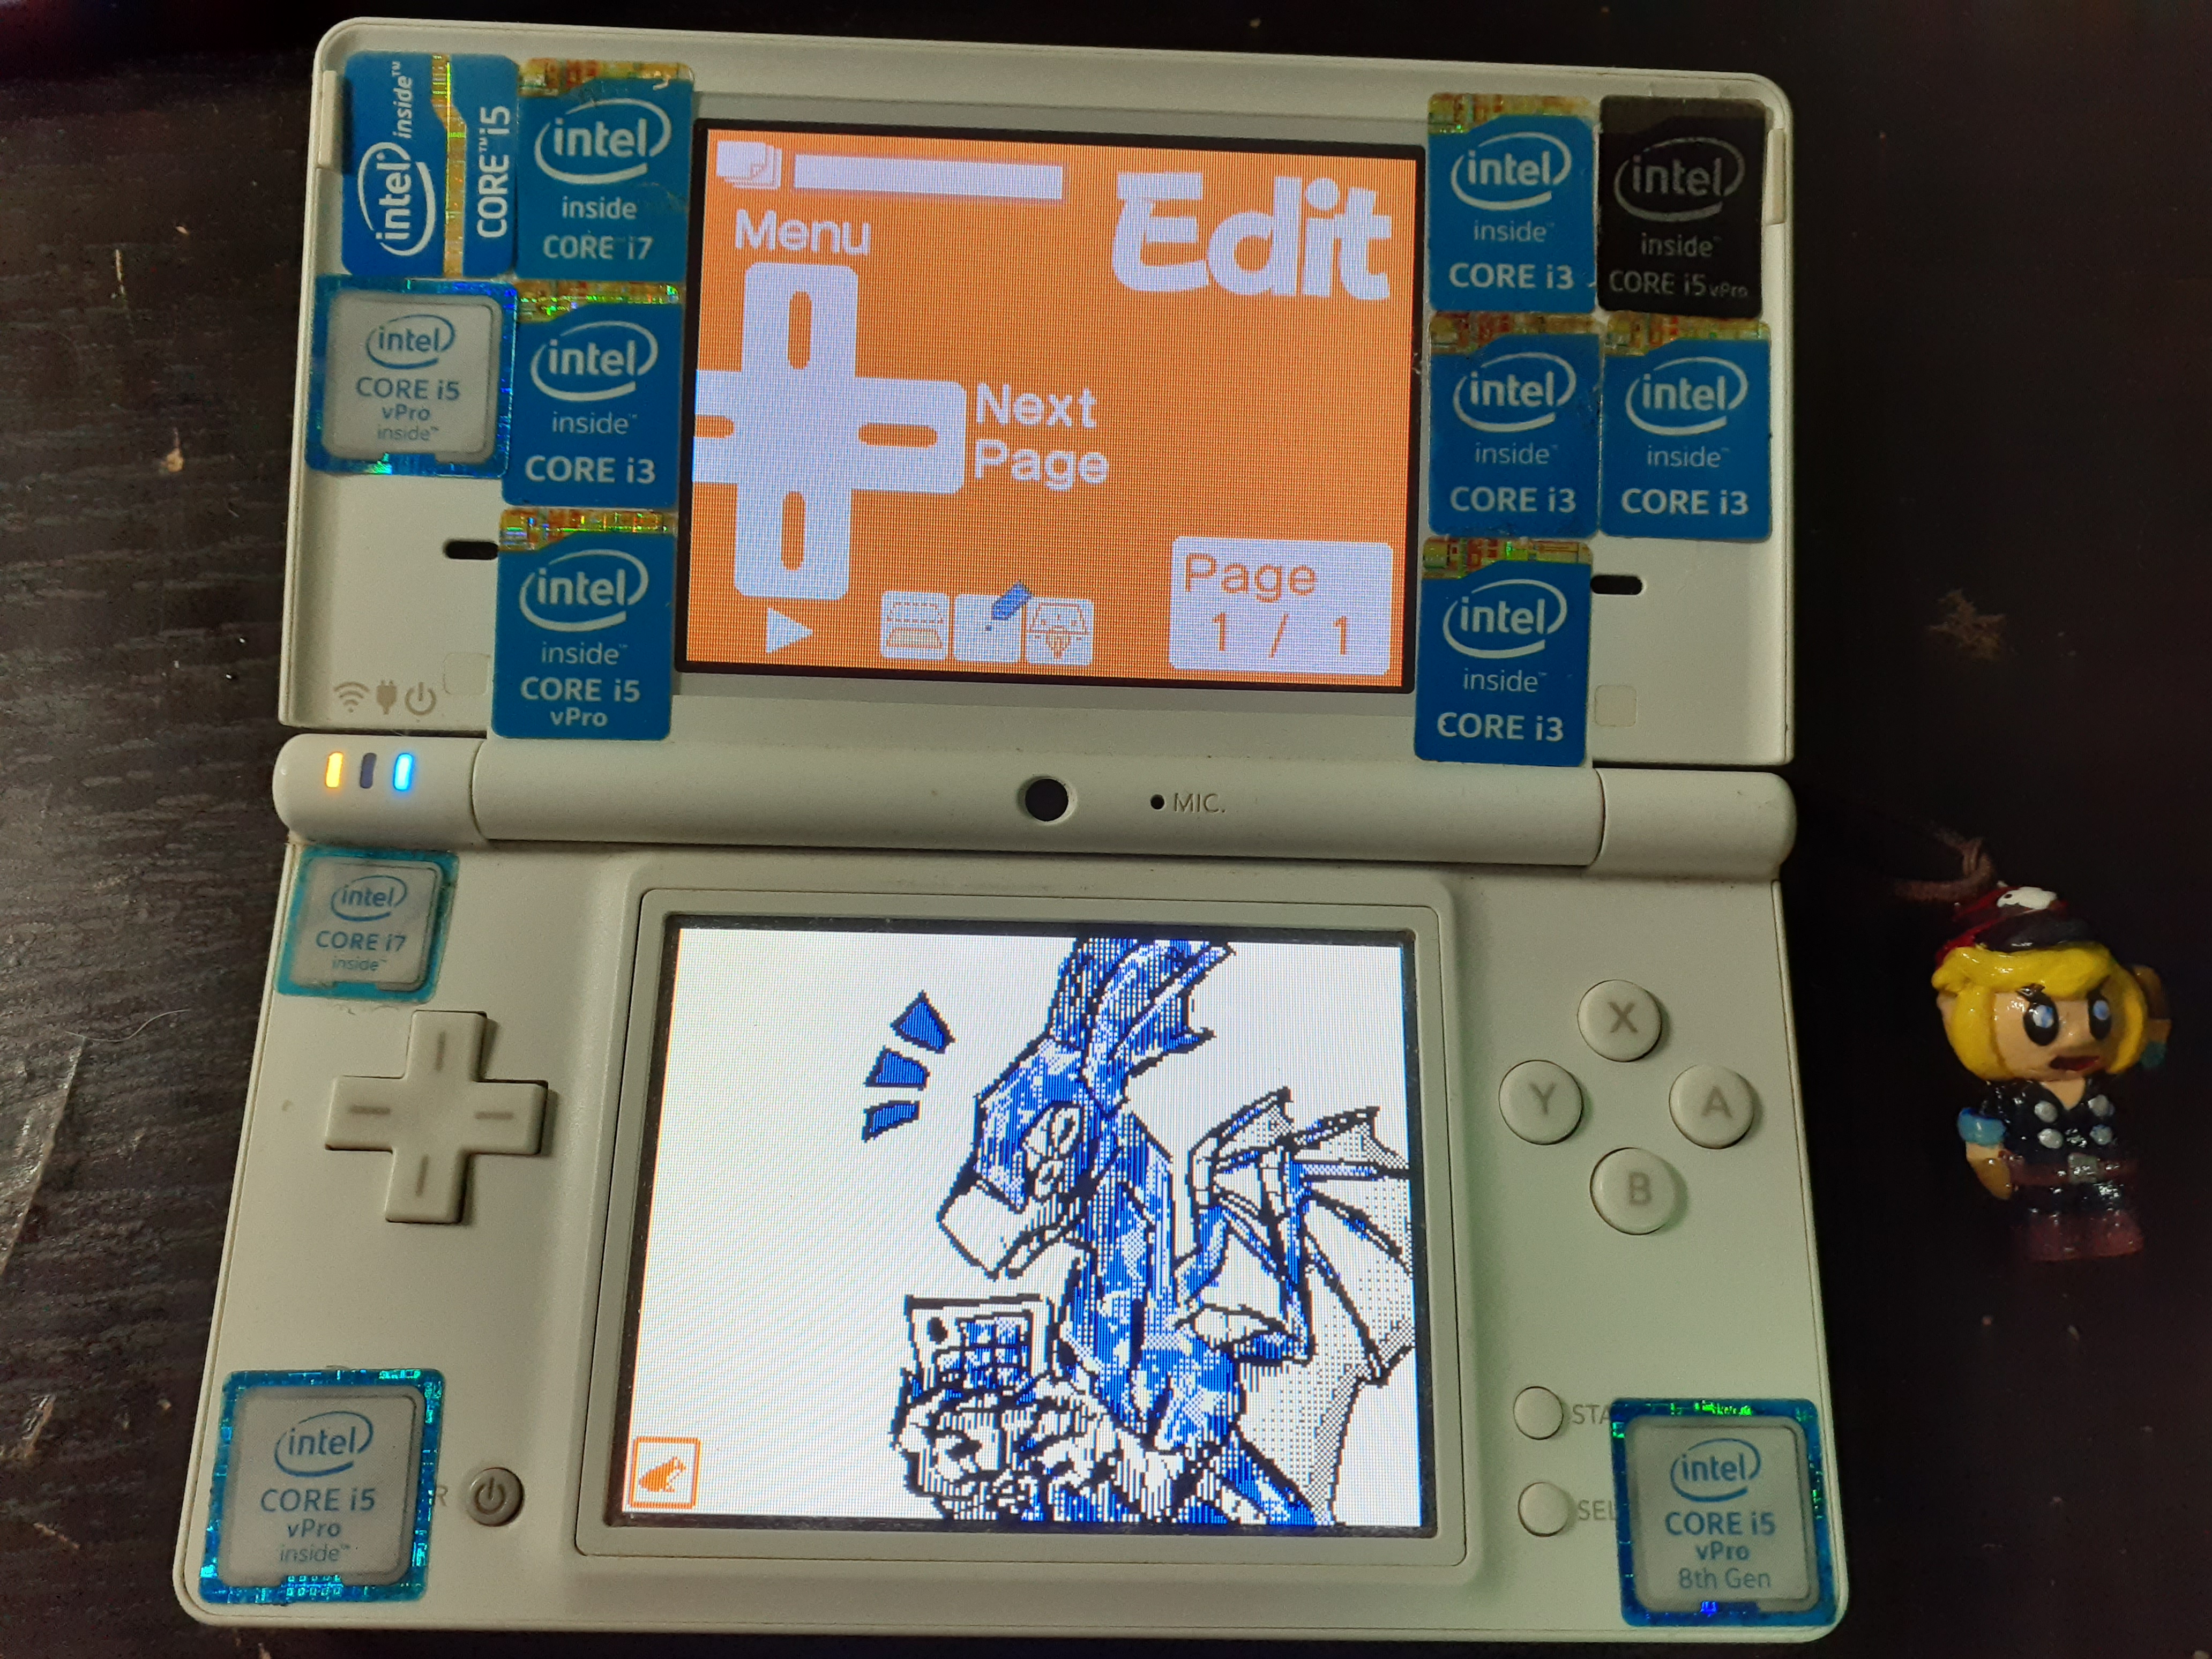 flipnote studio halfbody of int playing the DSi its based off